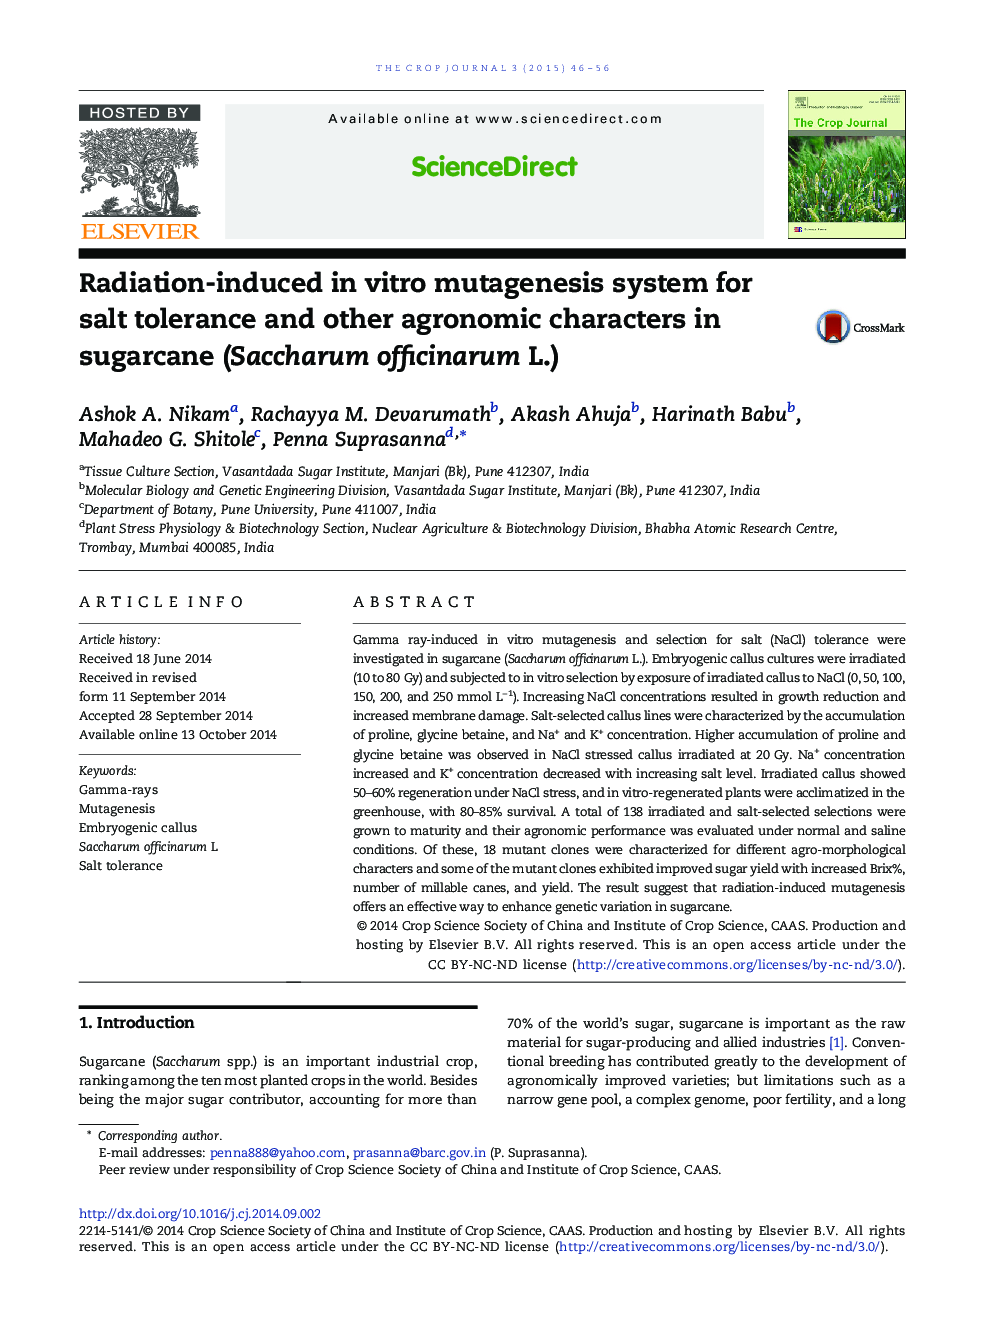 Radiation-induced in vitro mutagenesis system for salt tolerance and other agronomic characters in sugarcane (Saccharum officinarum L.)